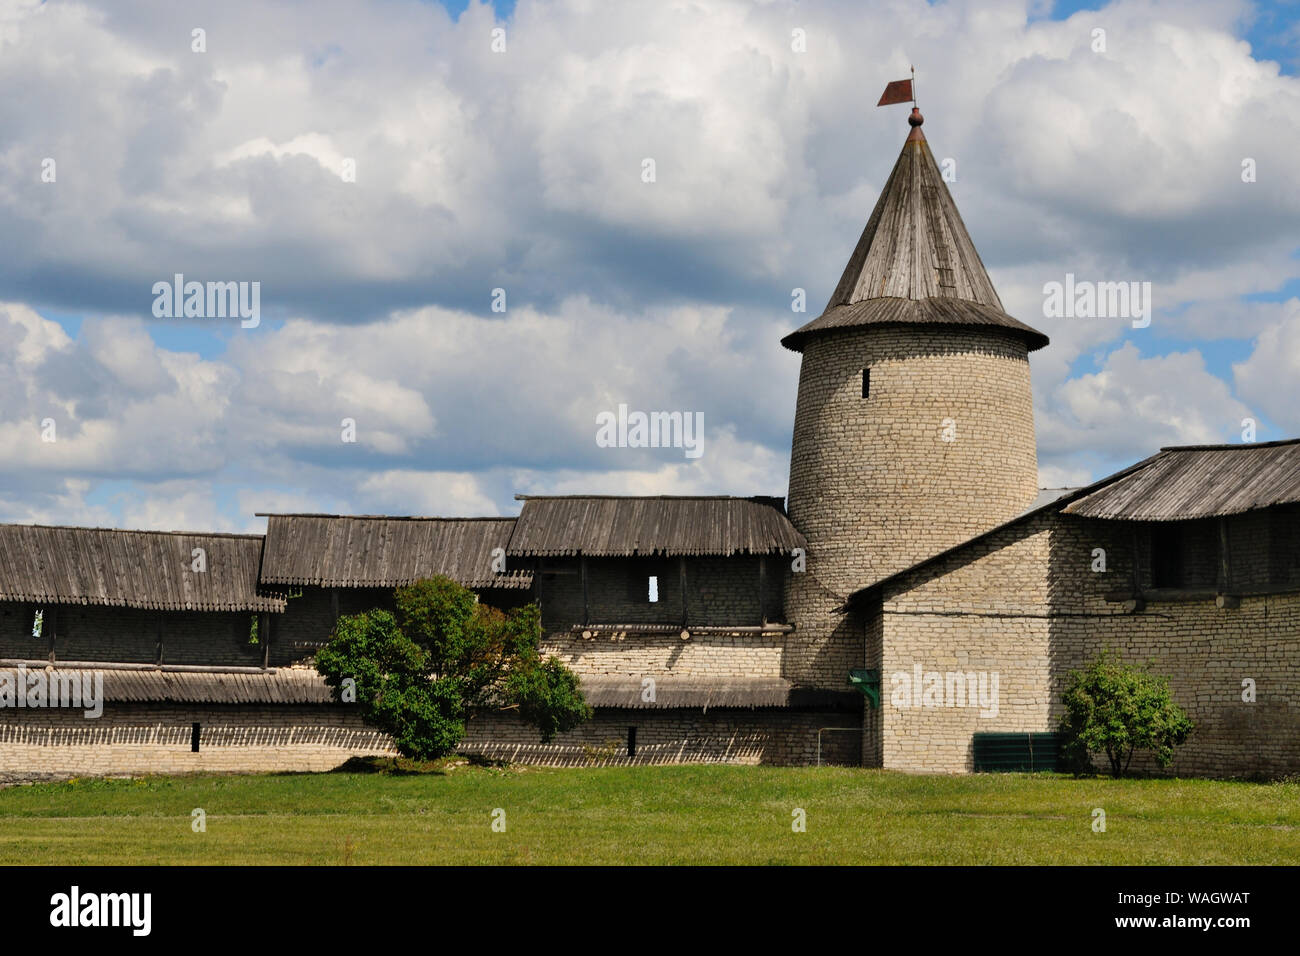 View of the Pskov Krom (fortress) walls from inside, Pskov, Russia Stock Photo